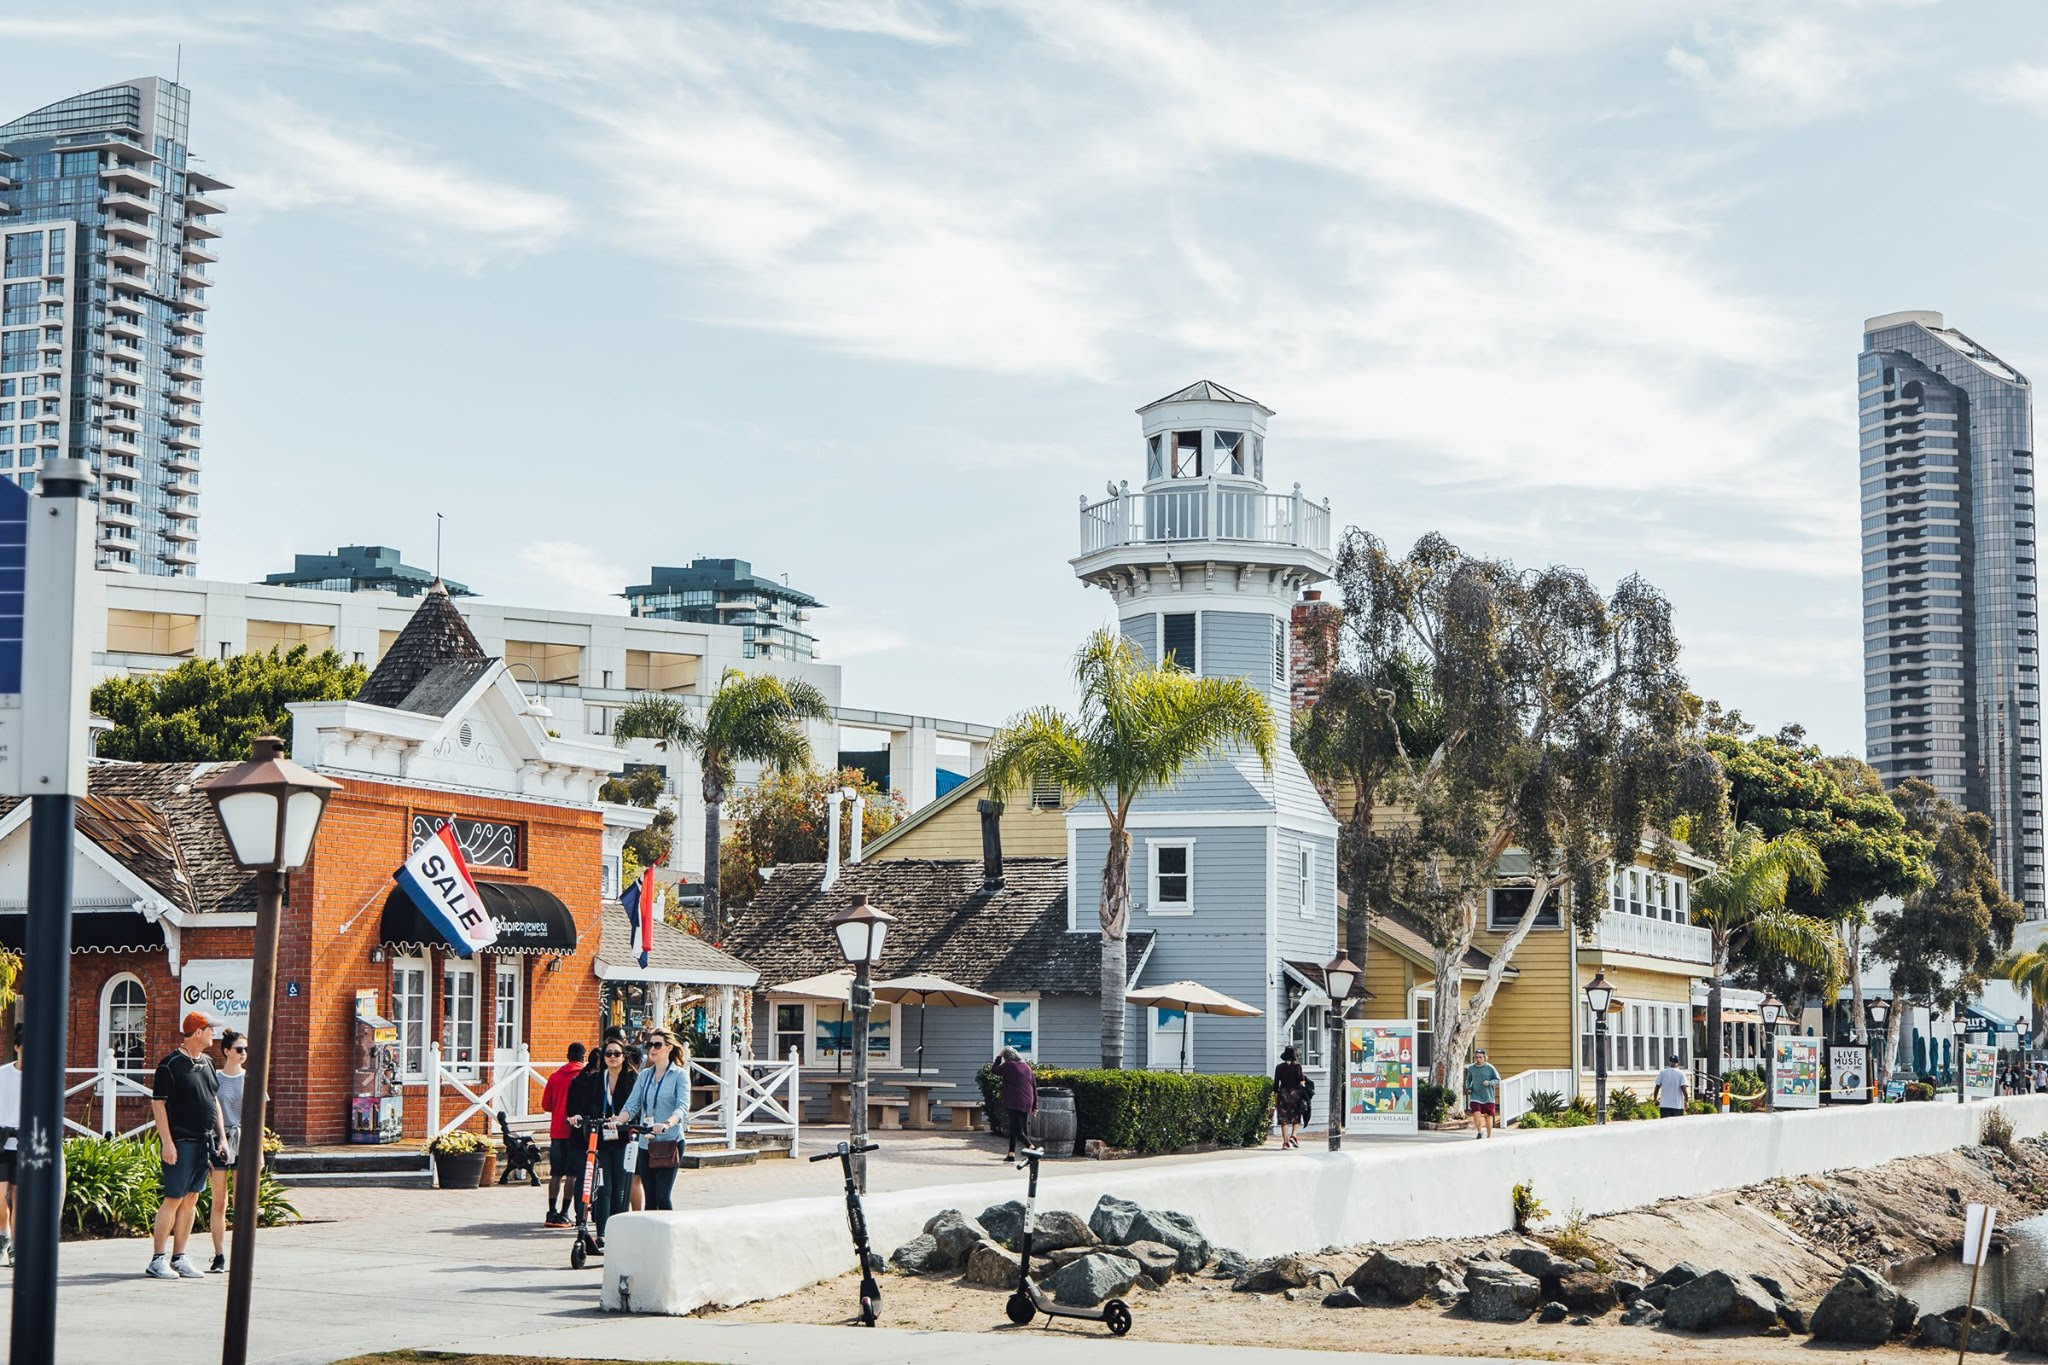 Seaport Village is one of the very best things to do in San Diego